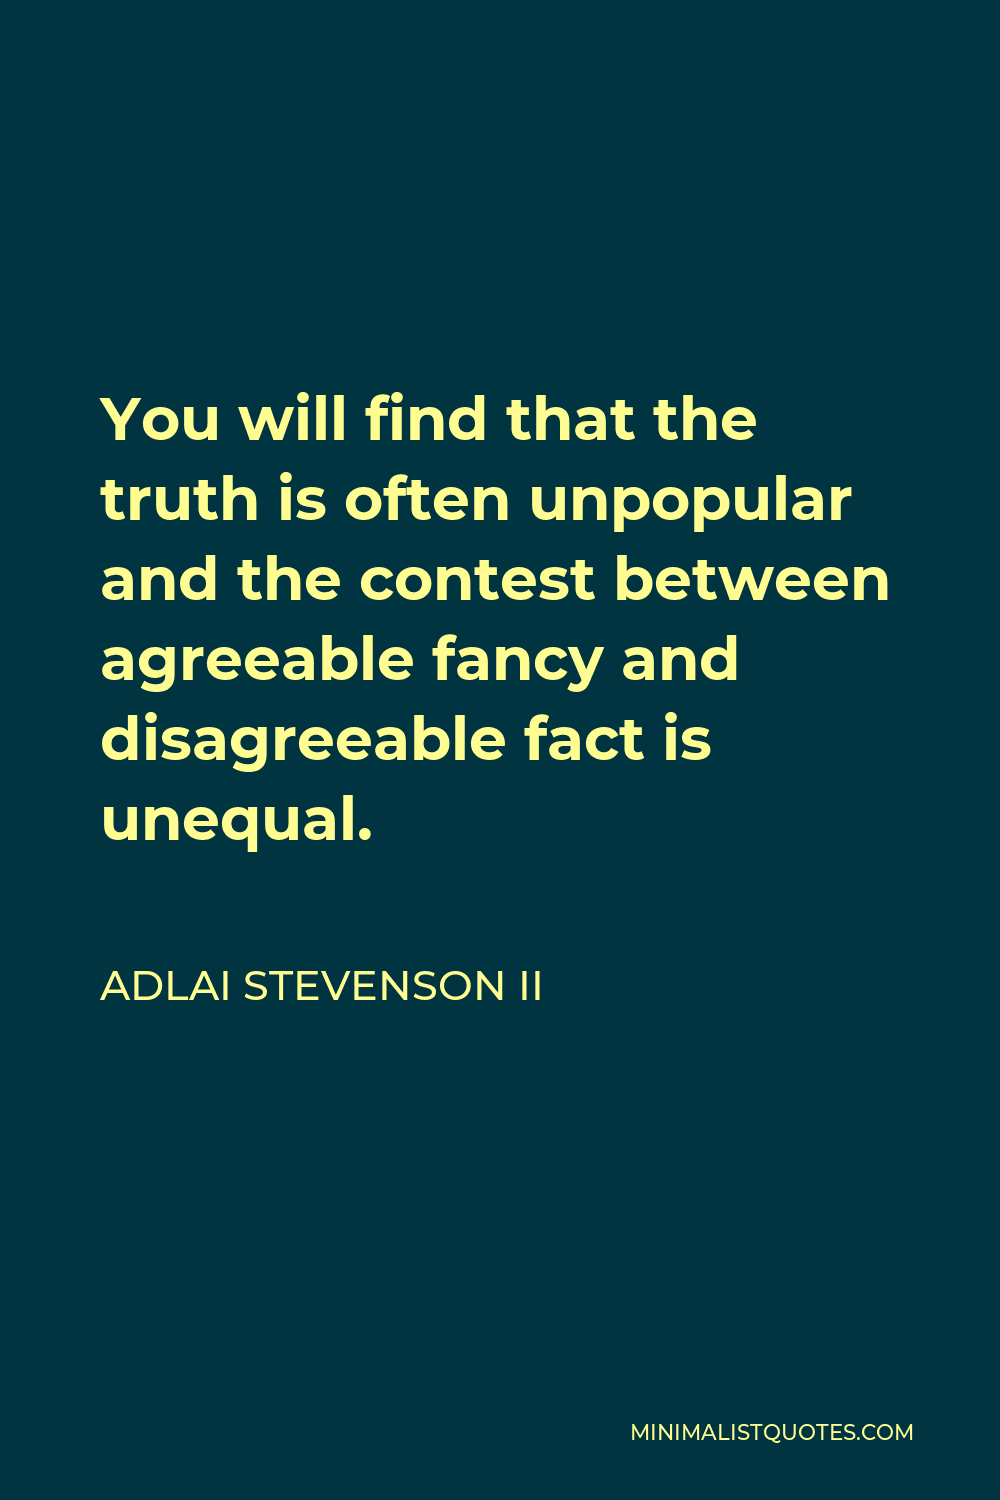 Adlai Stevenson II Quote - You will find that the truth is often unpopular and the contest between agreeable fancy and disagreeable fact is unequal.